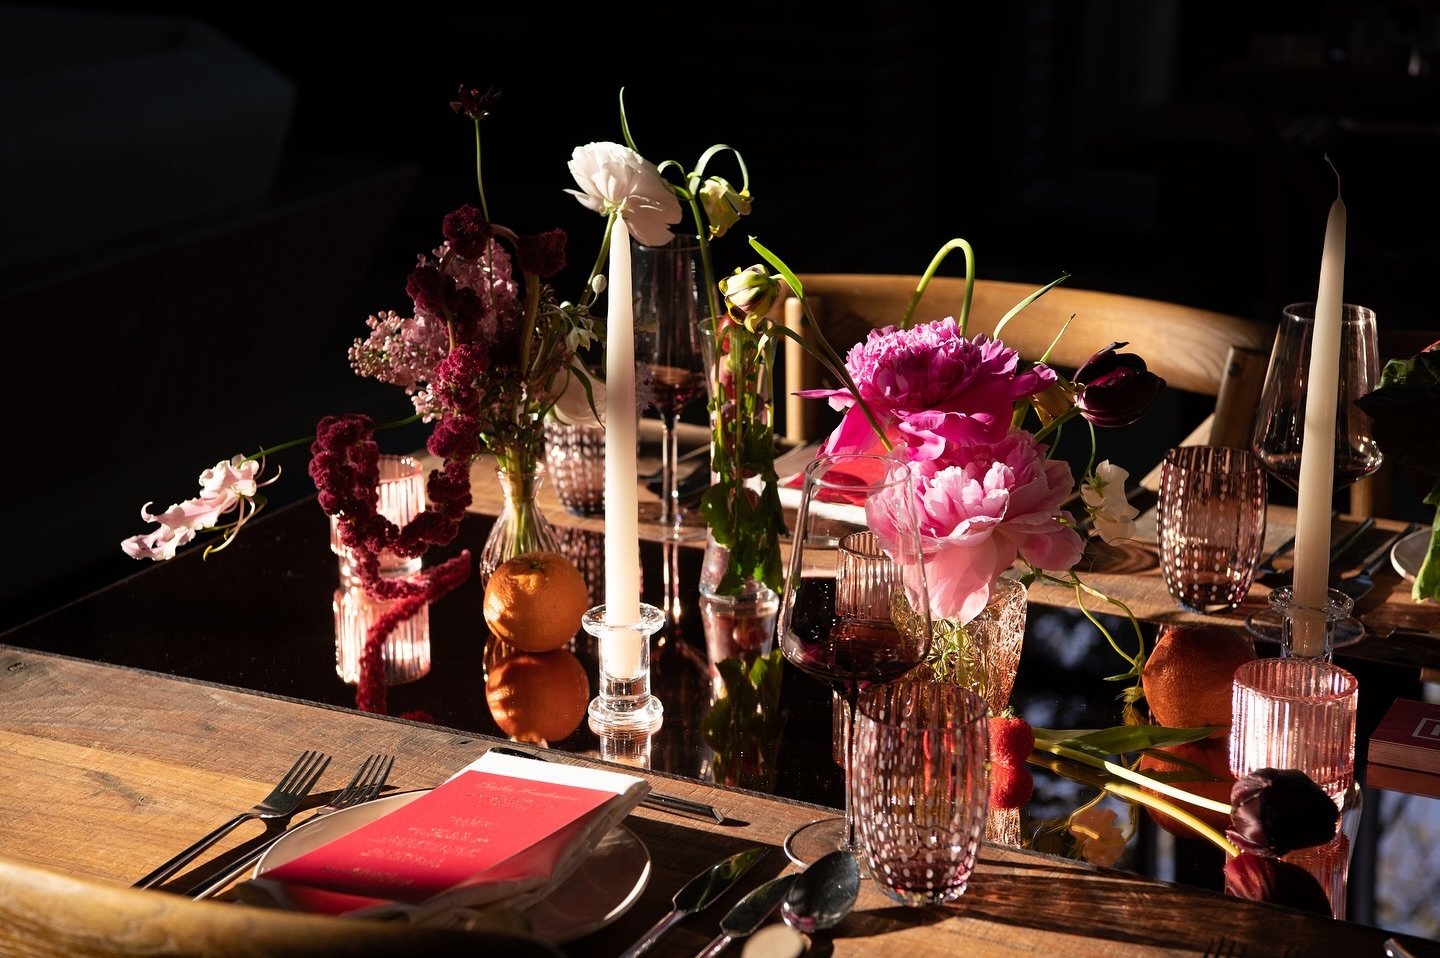 ESTĒE LAUDER NUTRITIOUS DINNER

This time last year, AVANT CREATIVE designed an intimate dinner with @karliekloss to celebrate the launch of the new&nbsp;@esteelauder Nutritious collection.

This stunning tablescape echoes the collection with a symph